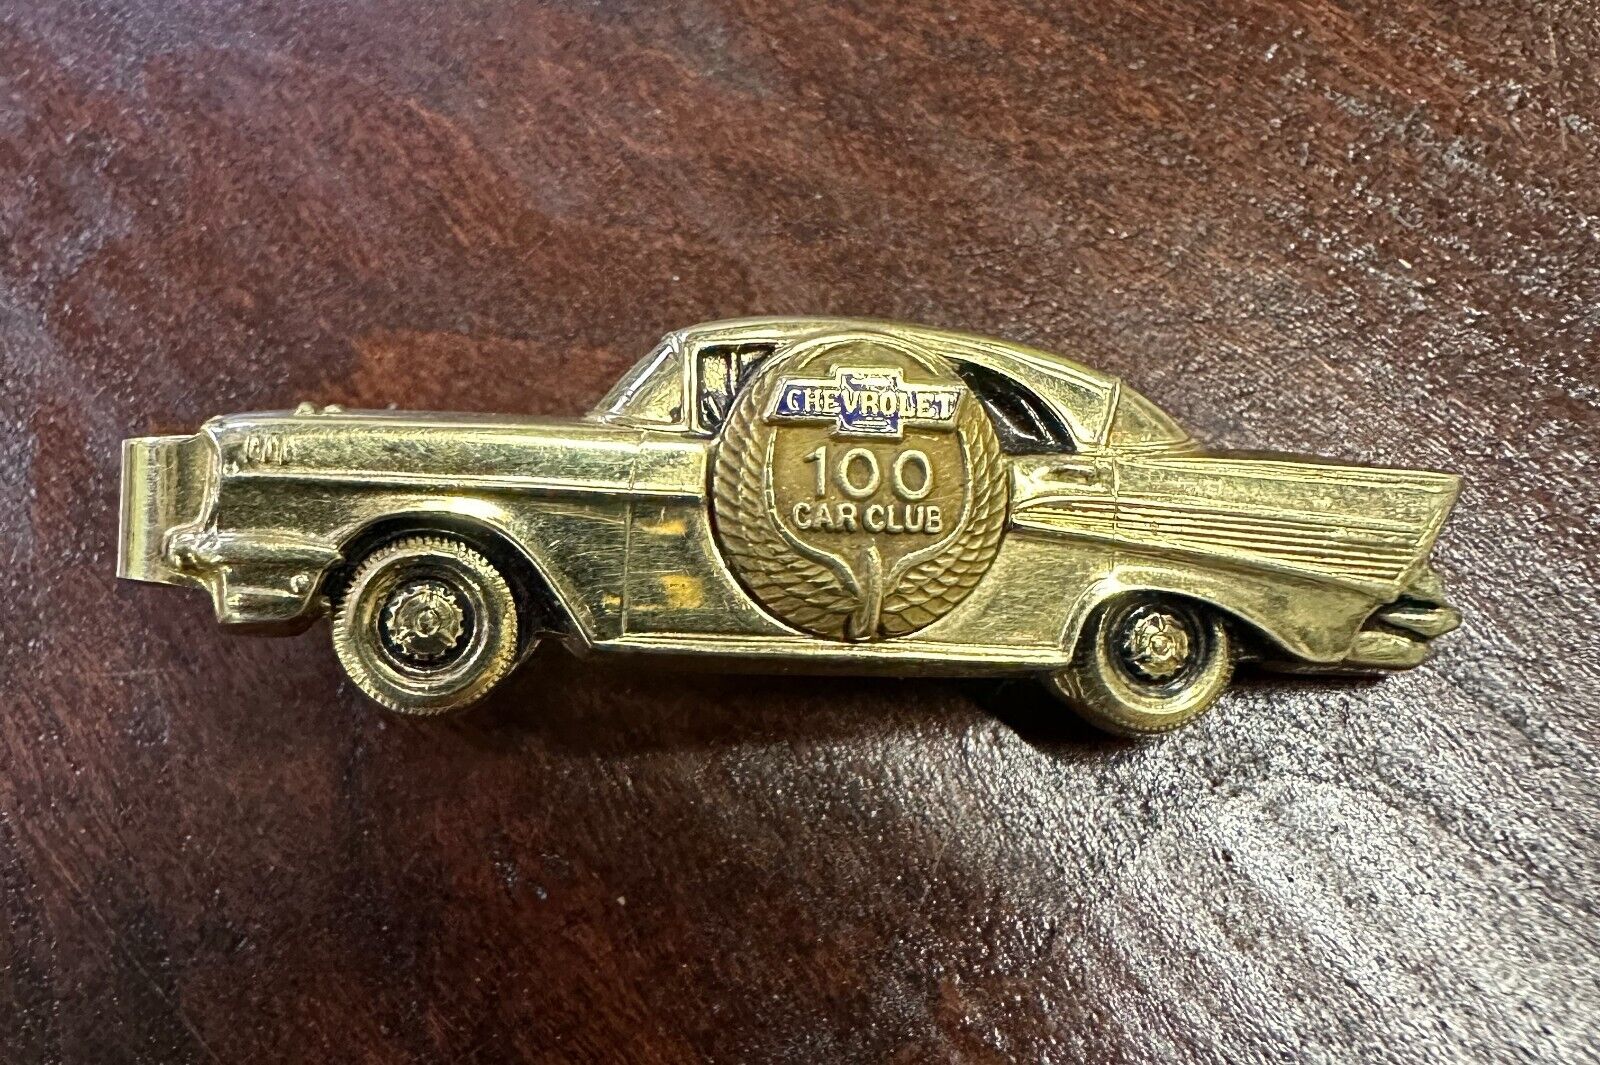 Chevrolet 100 Car Club Tie Clip Clasp 1957 Chevy Belair 1/20 - 12k Gold Filled